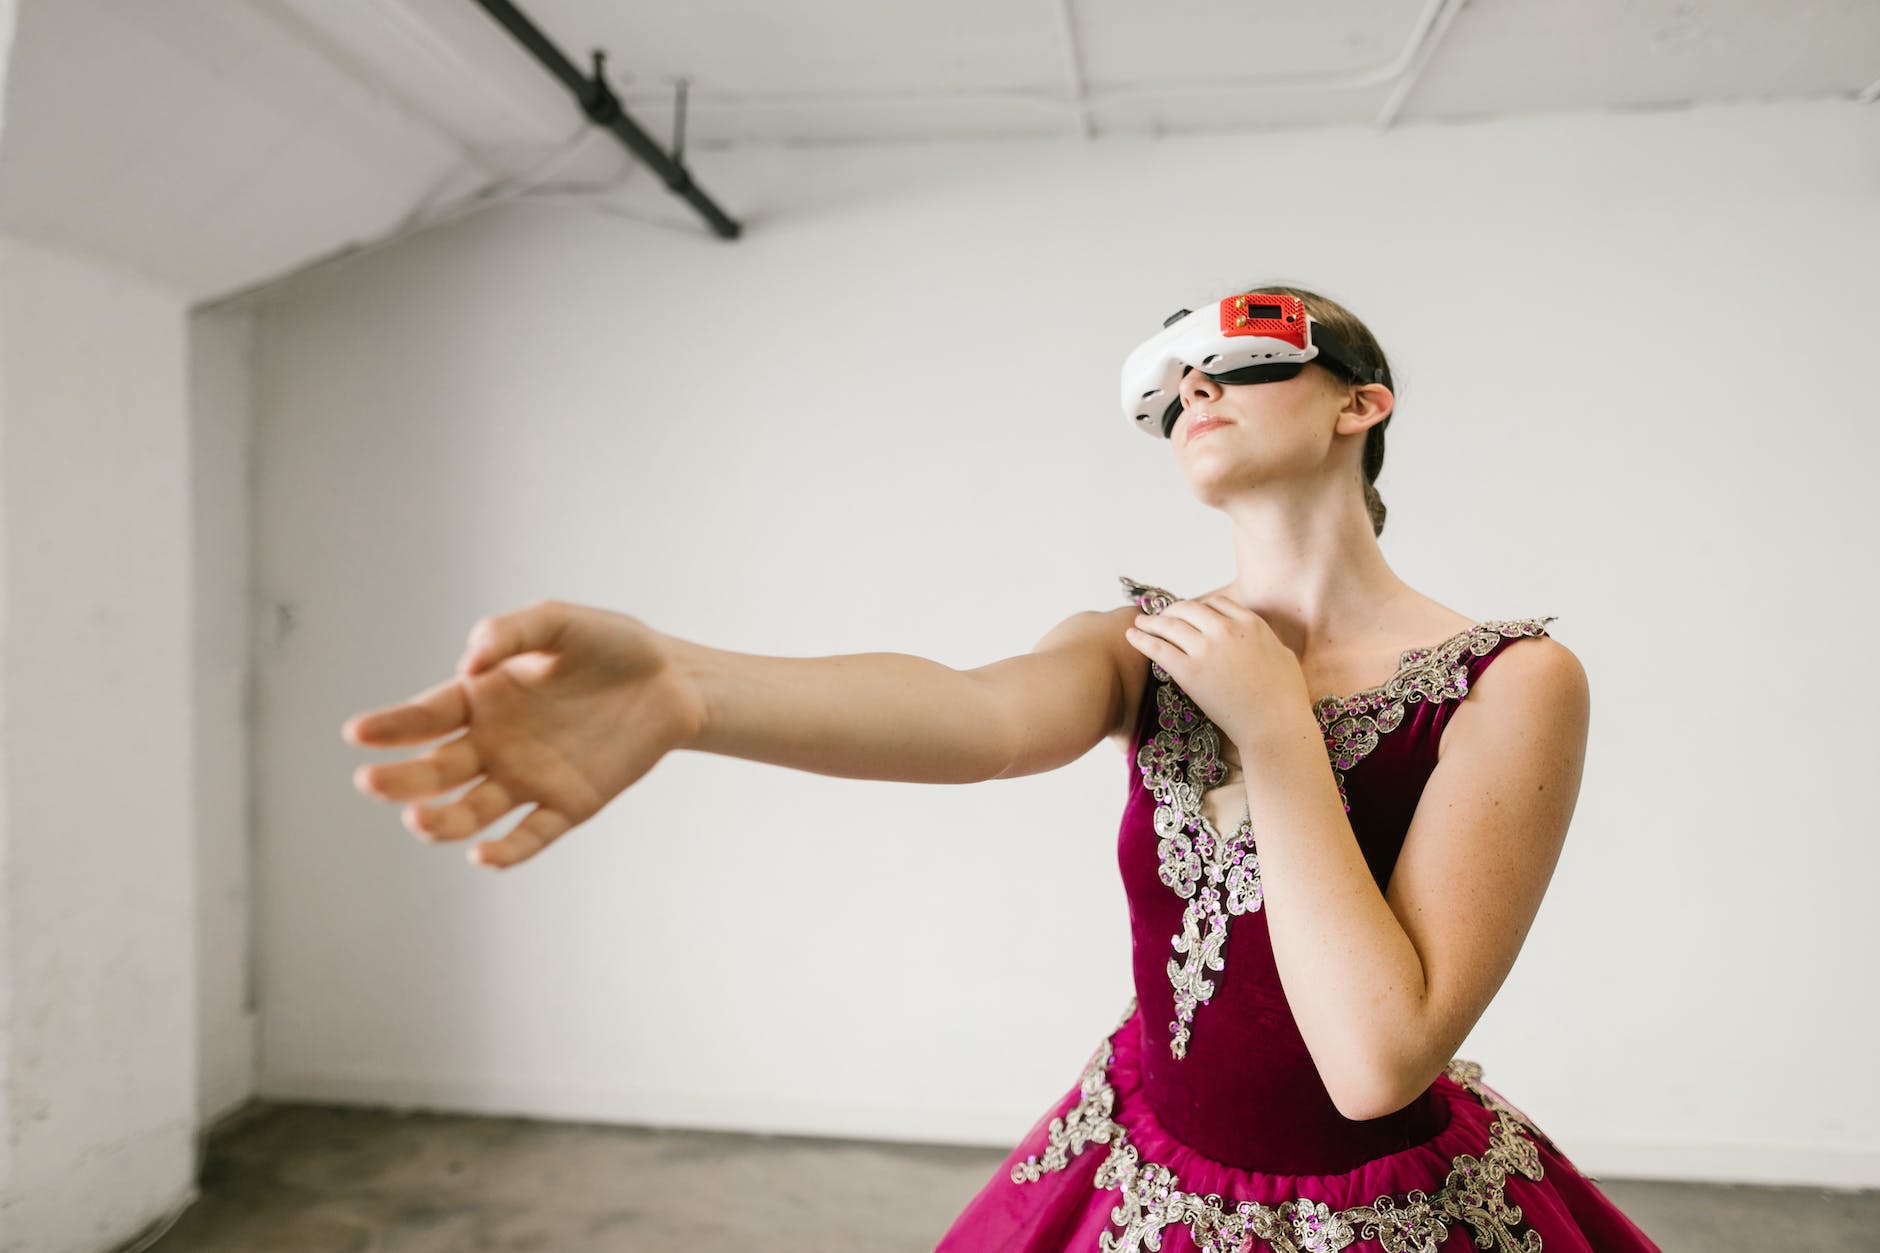 a woman in a red dress dancing while wearing a vr headset